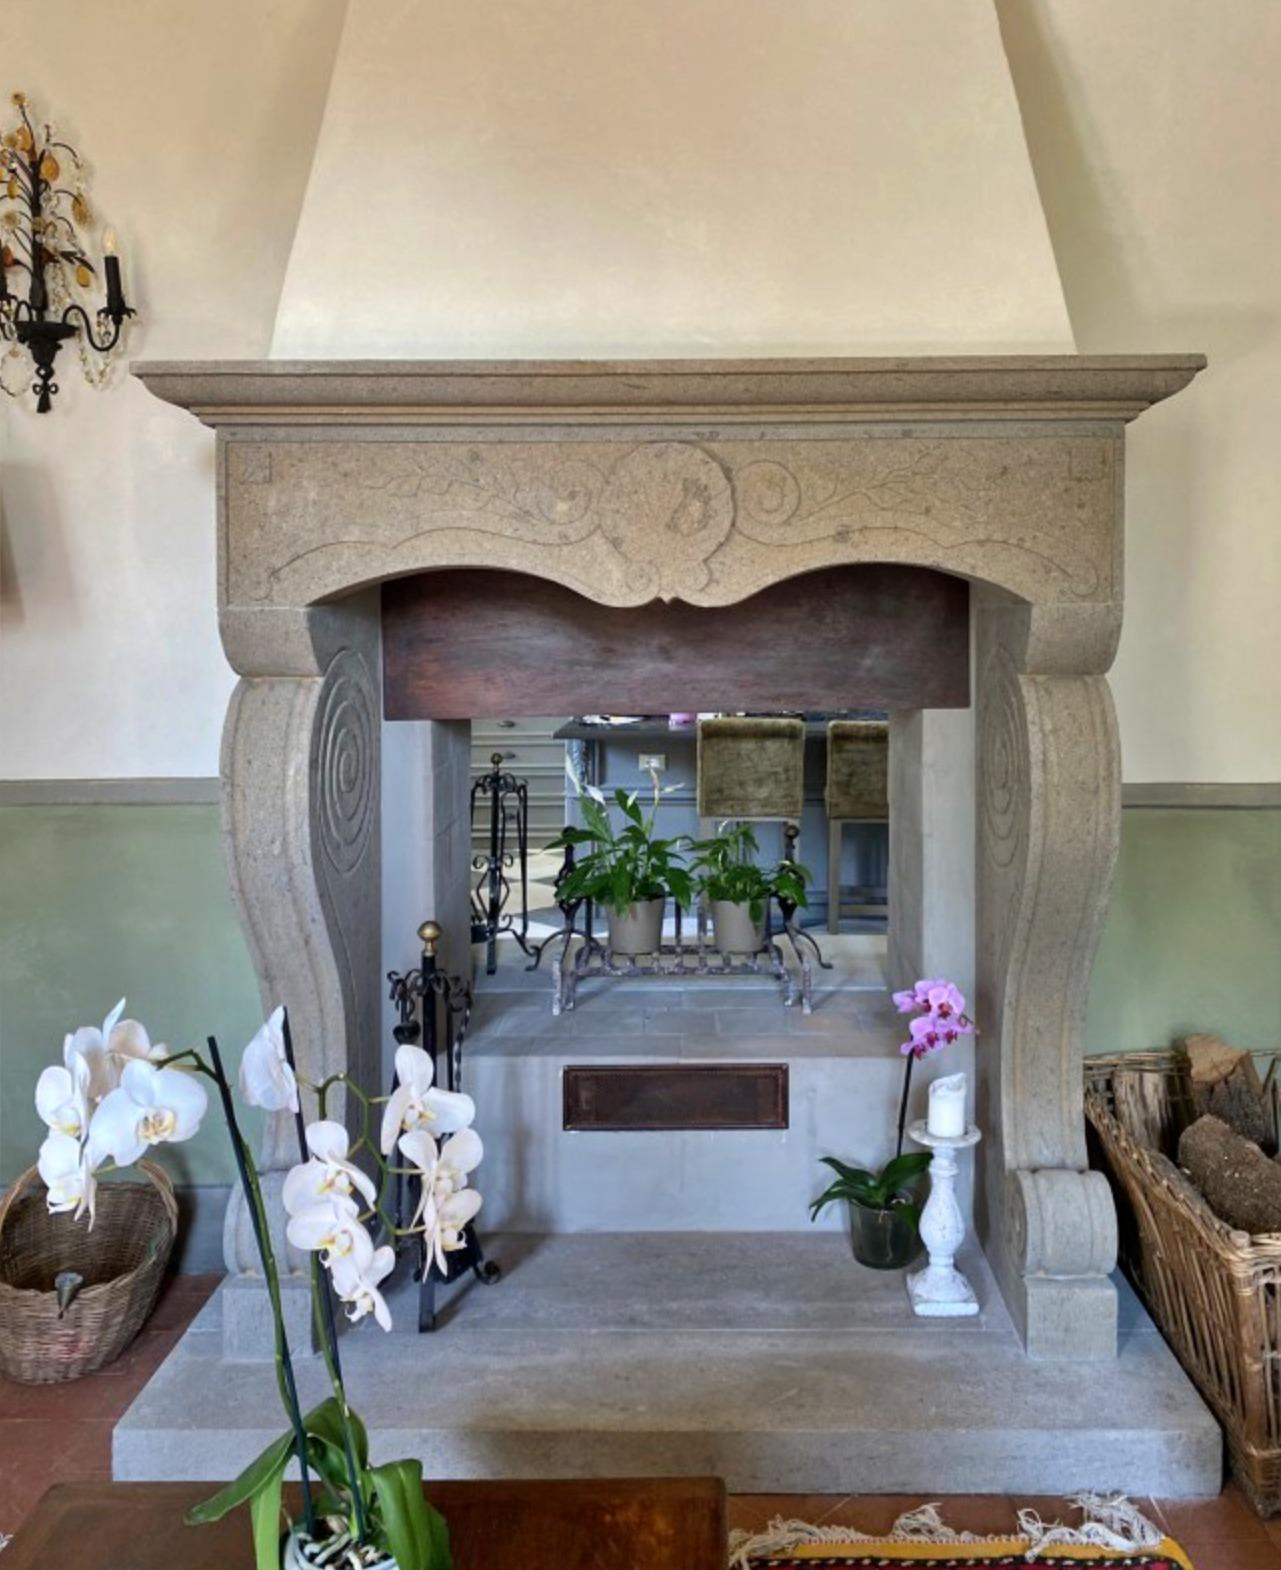 Fireplace in Volcanic Stone Peperino Laziale (Italy) 20th Century
the architrave is decorated with a central shell
HEIGHT 180cm
WIDTH 170cm
DEPTH 60cm
TOTAL WEIGHT 850 Kg
MATERIAL Peperino stone
Perfect conditions.